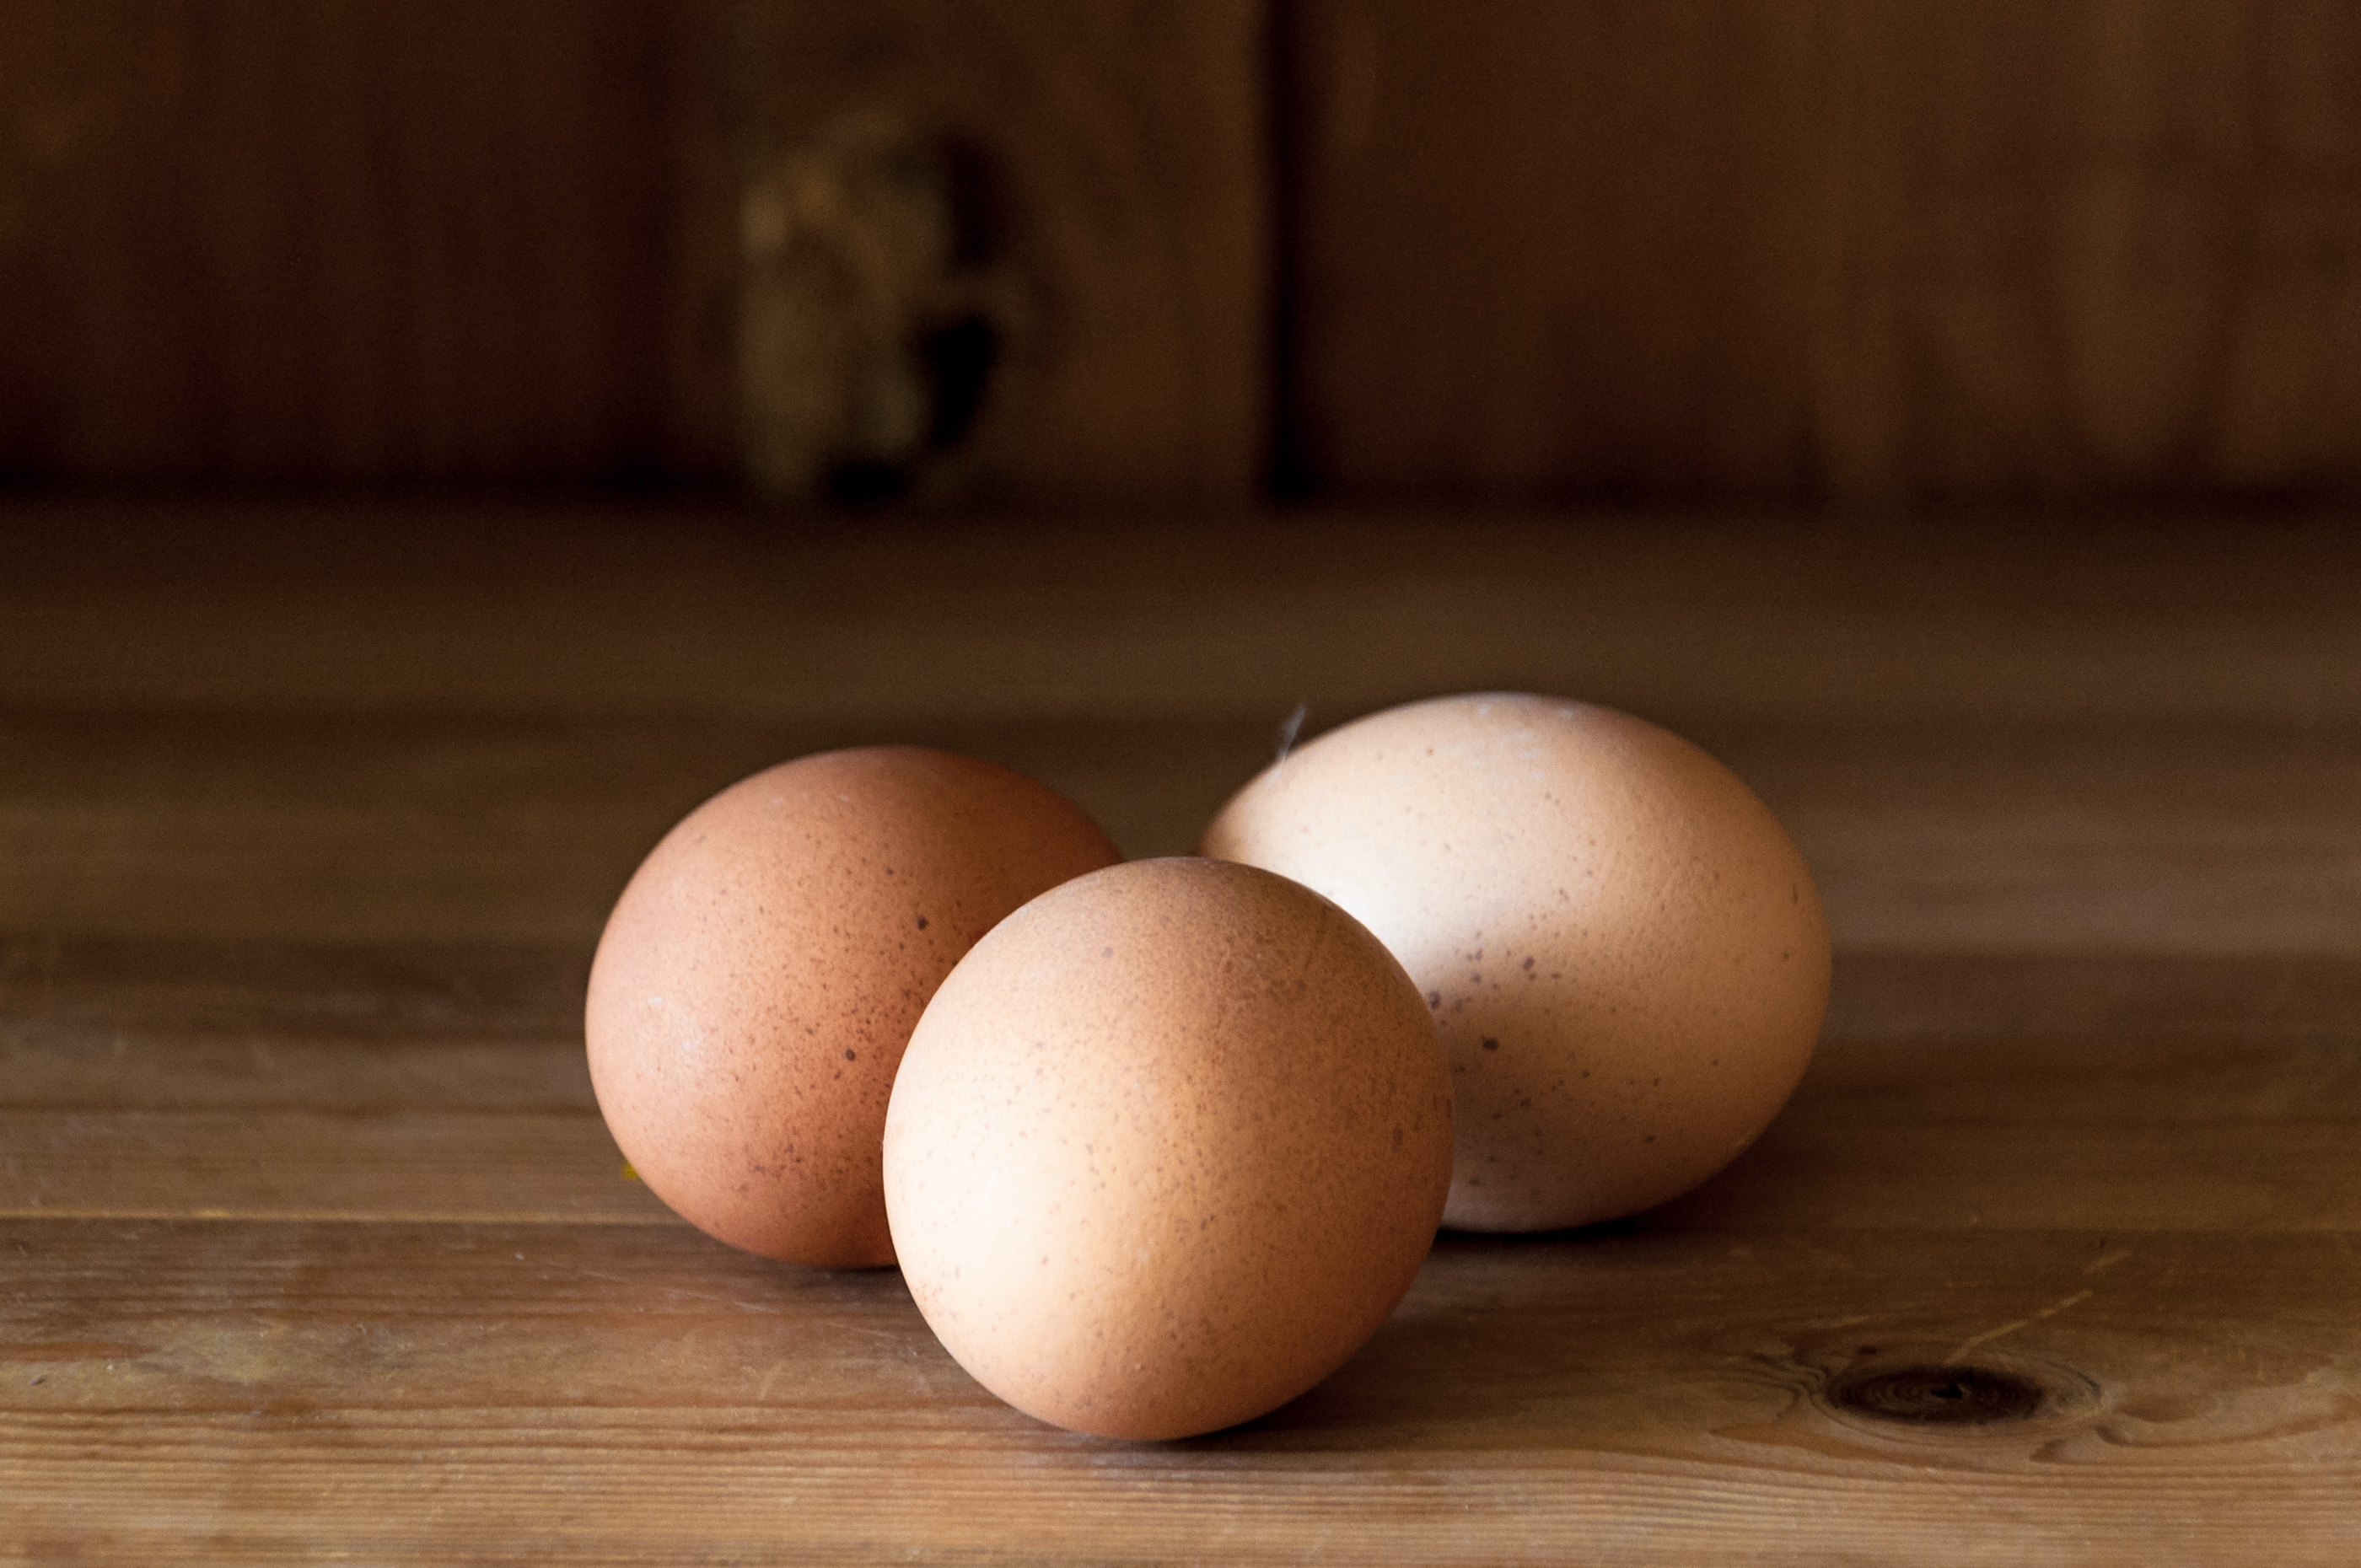 Eggs on wood background, Agriculture, Old, Image, Ingredient, HQ Photo